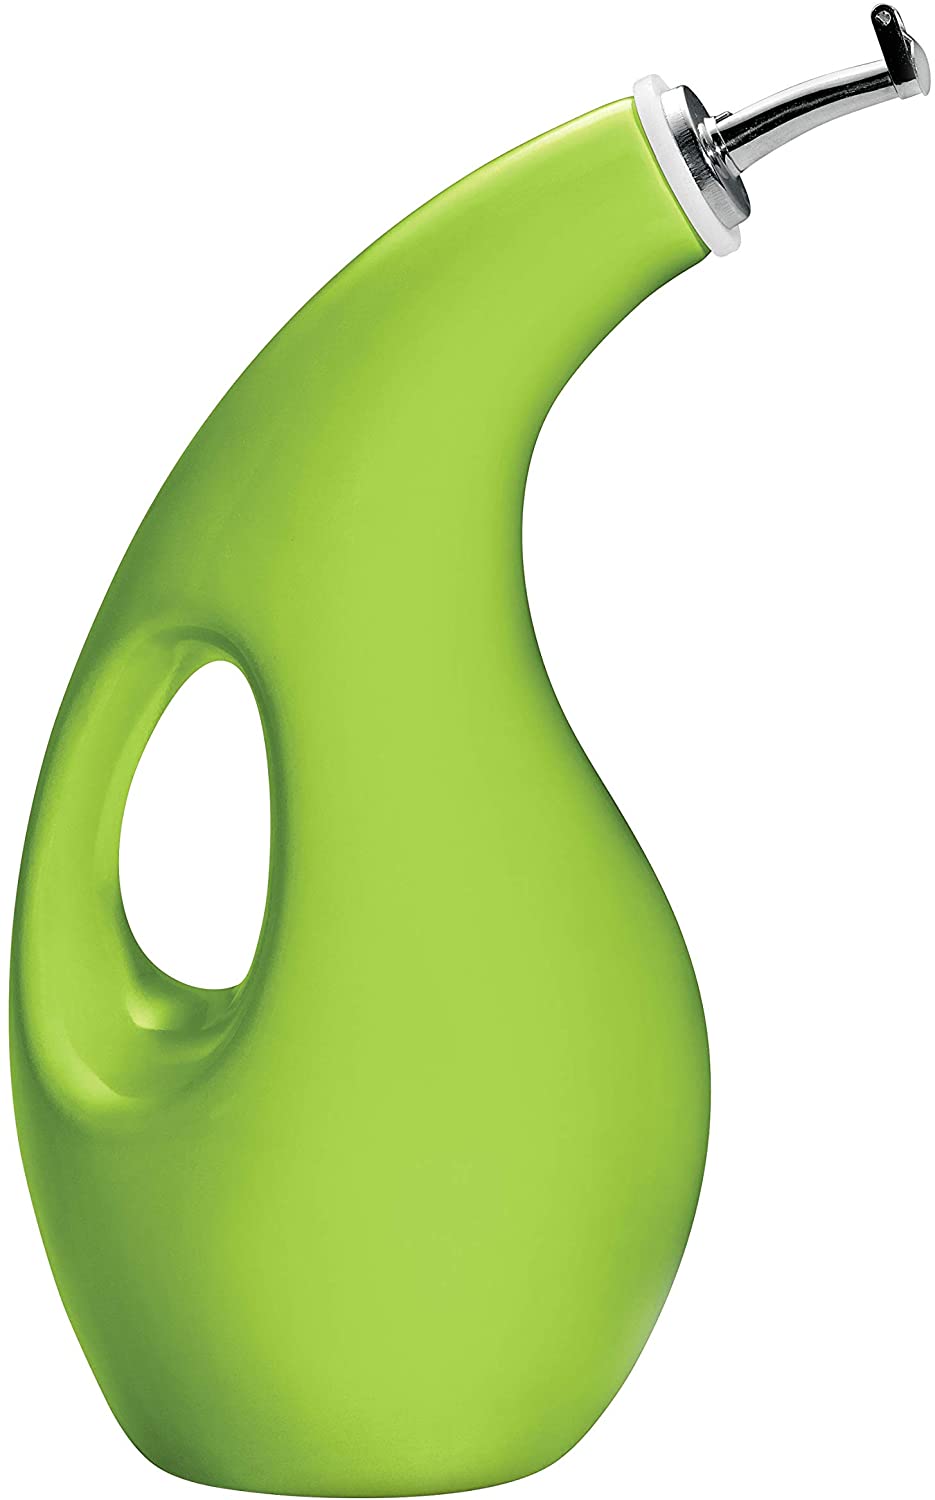 Rachael Ray Solid Glaze Ceramics EVOO Olive Oil Bottle Dispenser with Spout